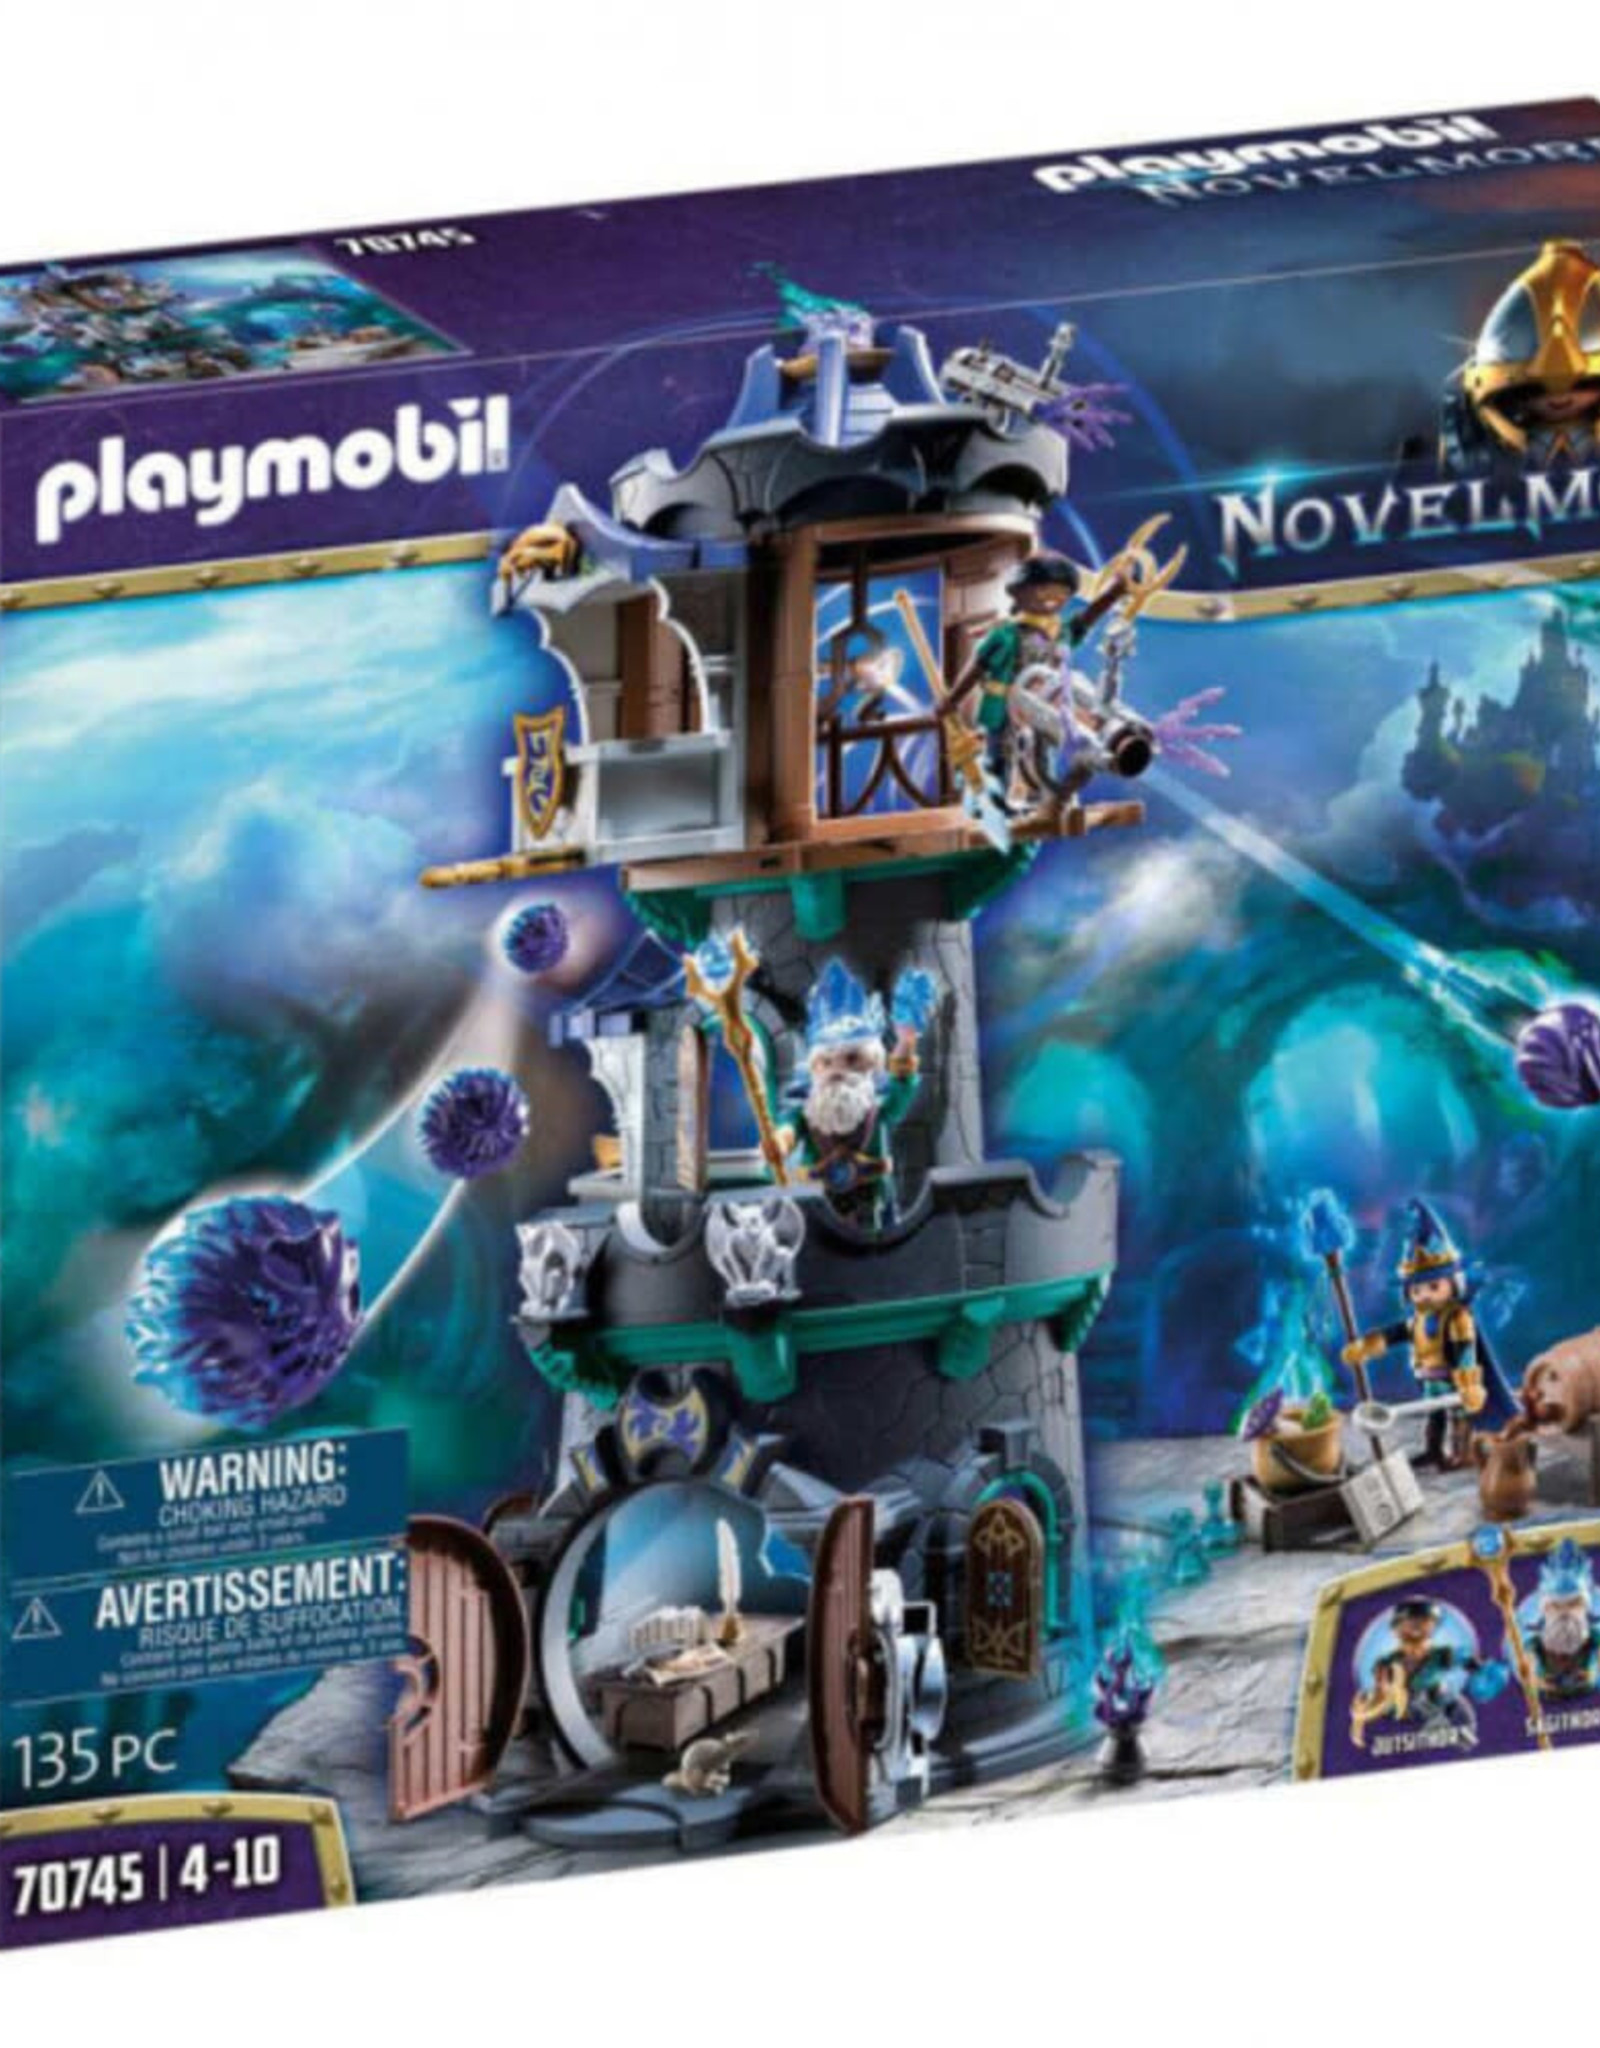 PLAYMOBIL Violet Vale - Wizard Tower